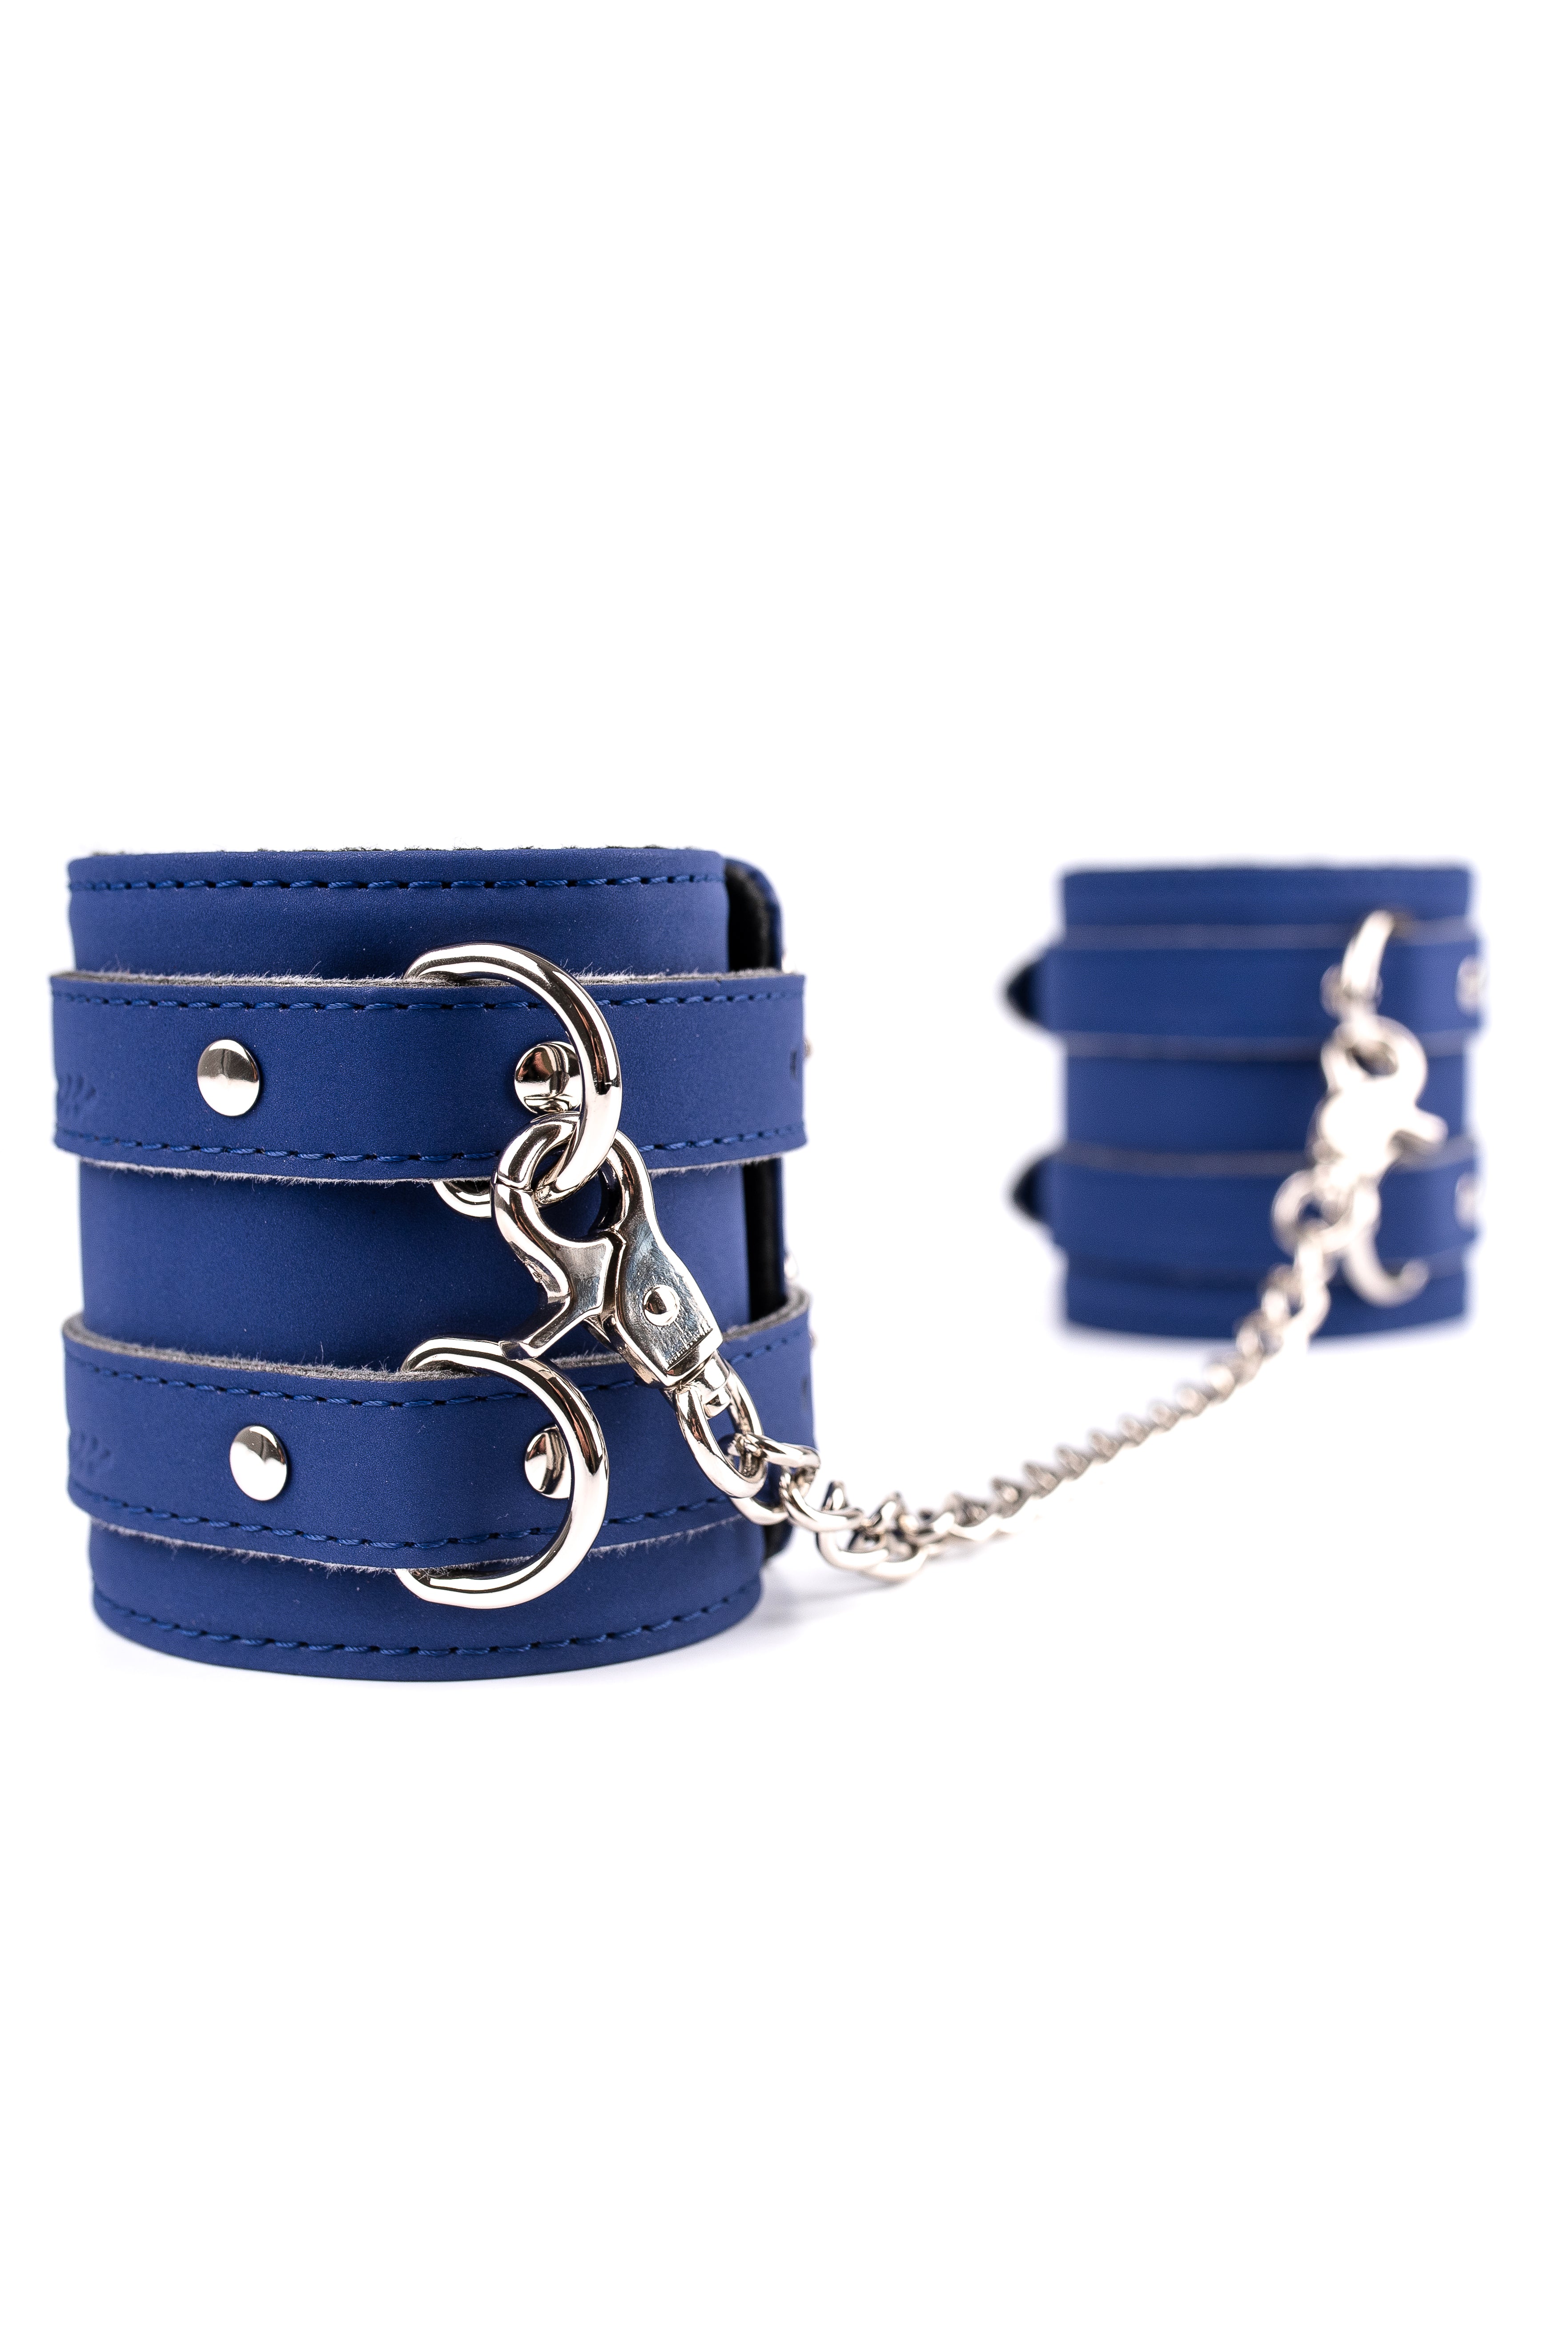 Vegan Leather Wide Handcuffs, Ankle cuffs with chain connector